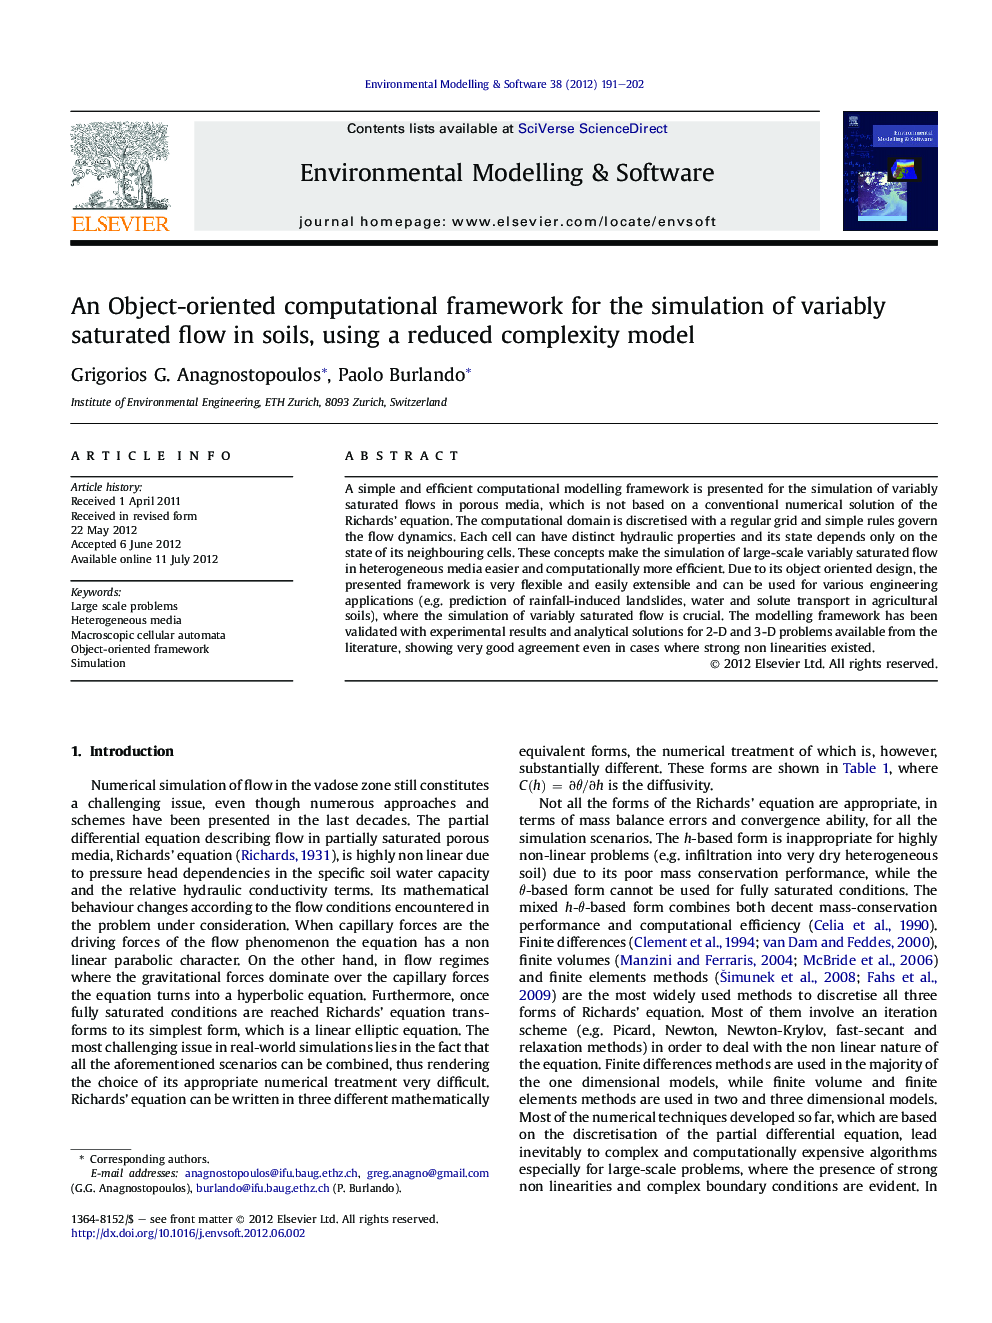 An Object-oriented computational framework for the simulation of variably saturated flow in soils, using a reduced complexity model